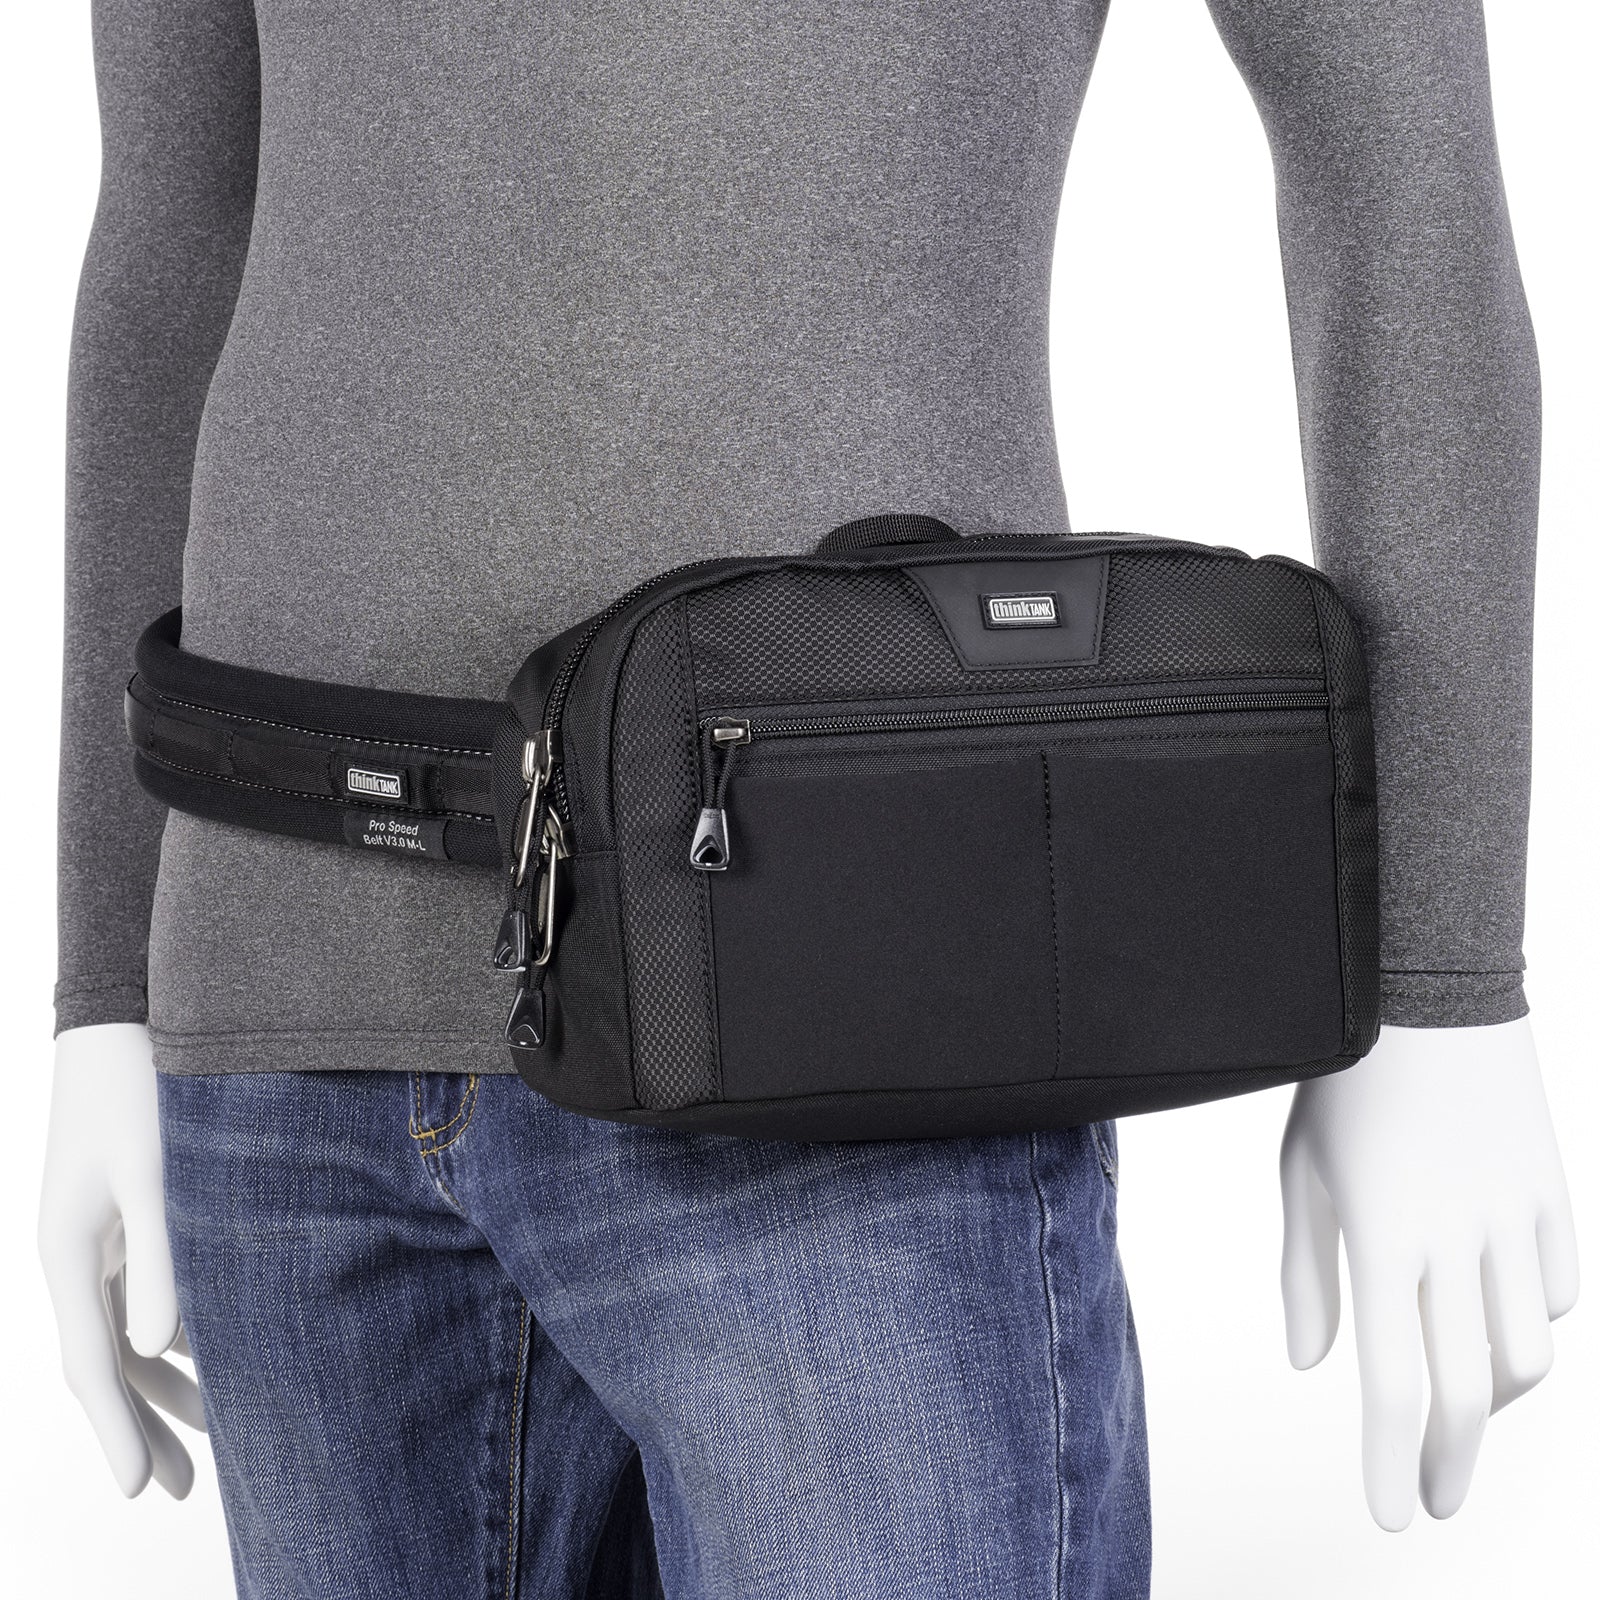 Attaches to any Think Tank belt (sold separately) Multiple ways to carry — shoulder bag or belt mount